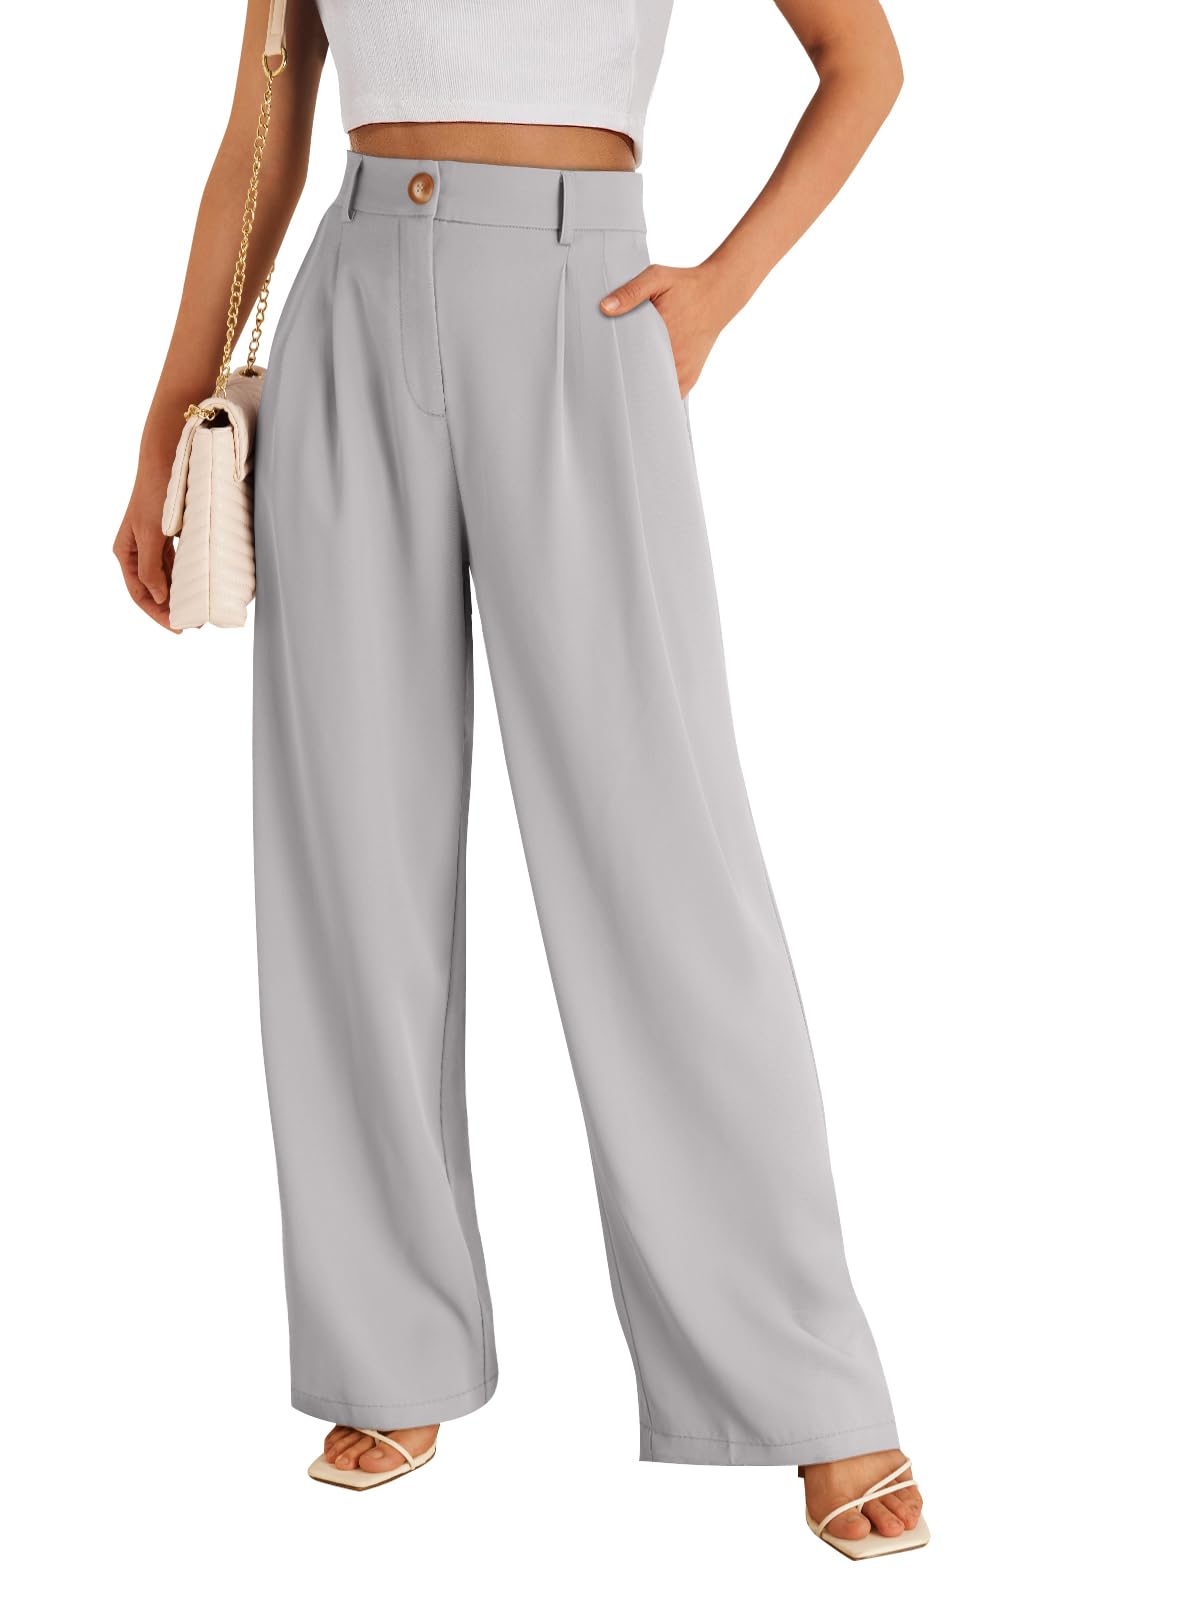 Wide Leg Dress Pants Women's High Waisted Business Casual Trousers VALOZENC Grey Small 